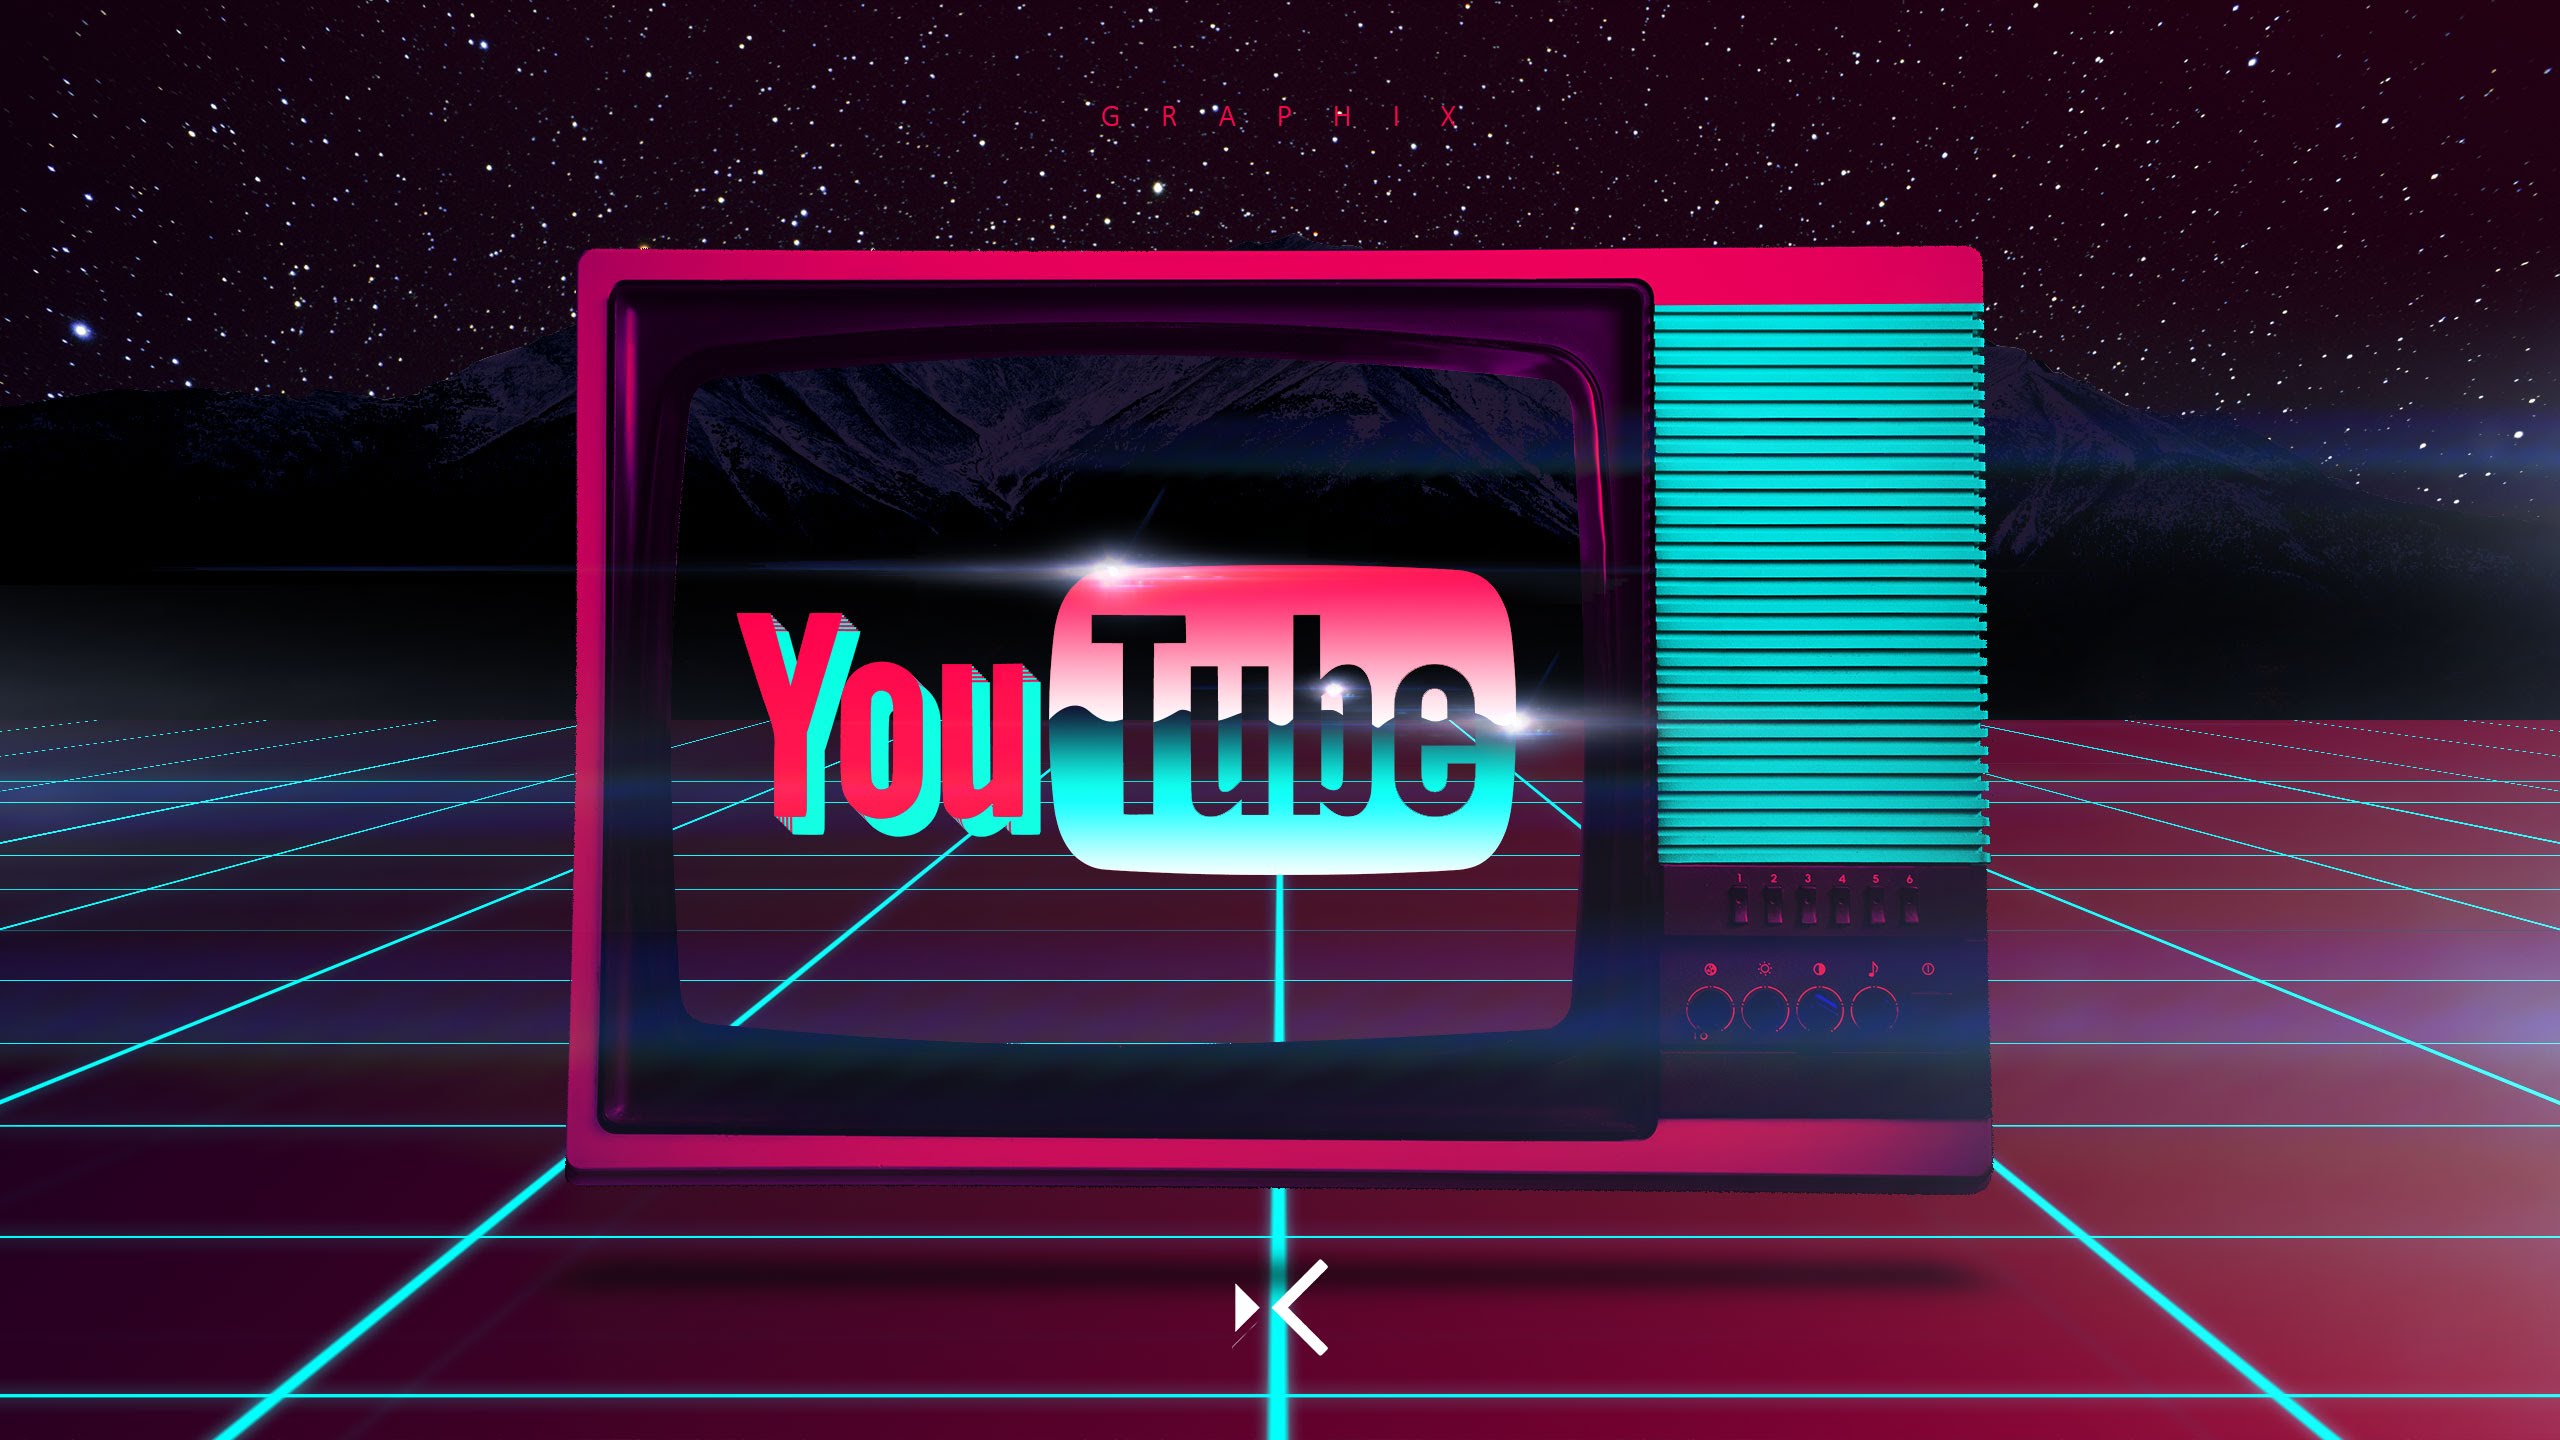 wallpaper for youtube channel,magenta,neon,graphic design,visual effect lighting,neon sign